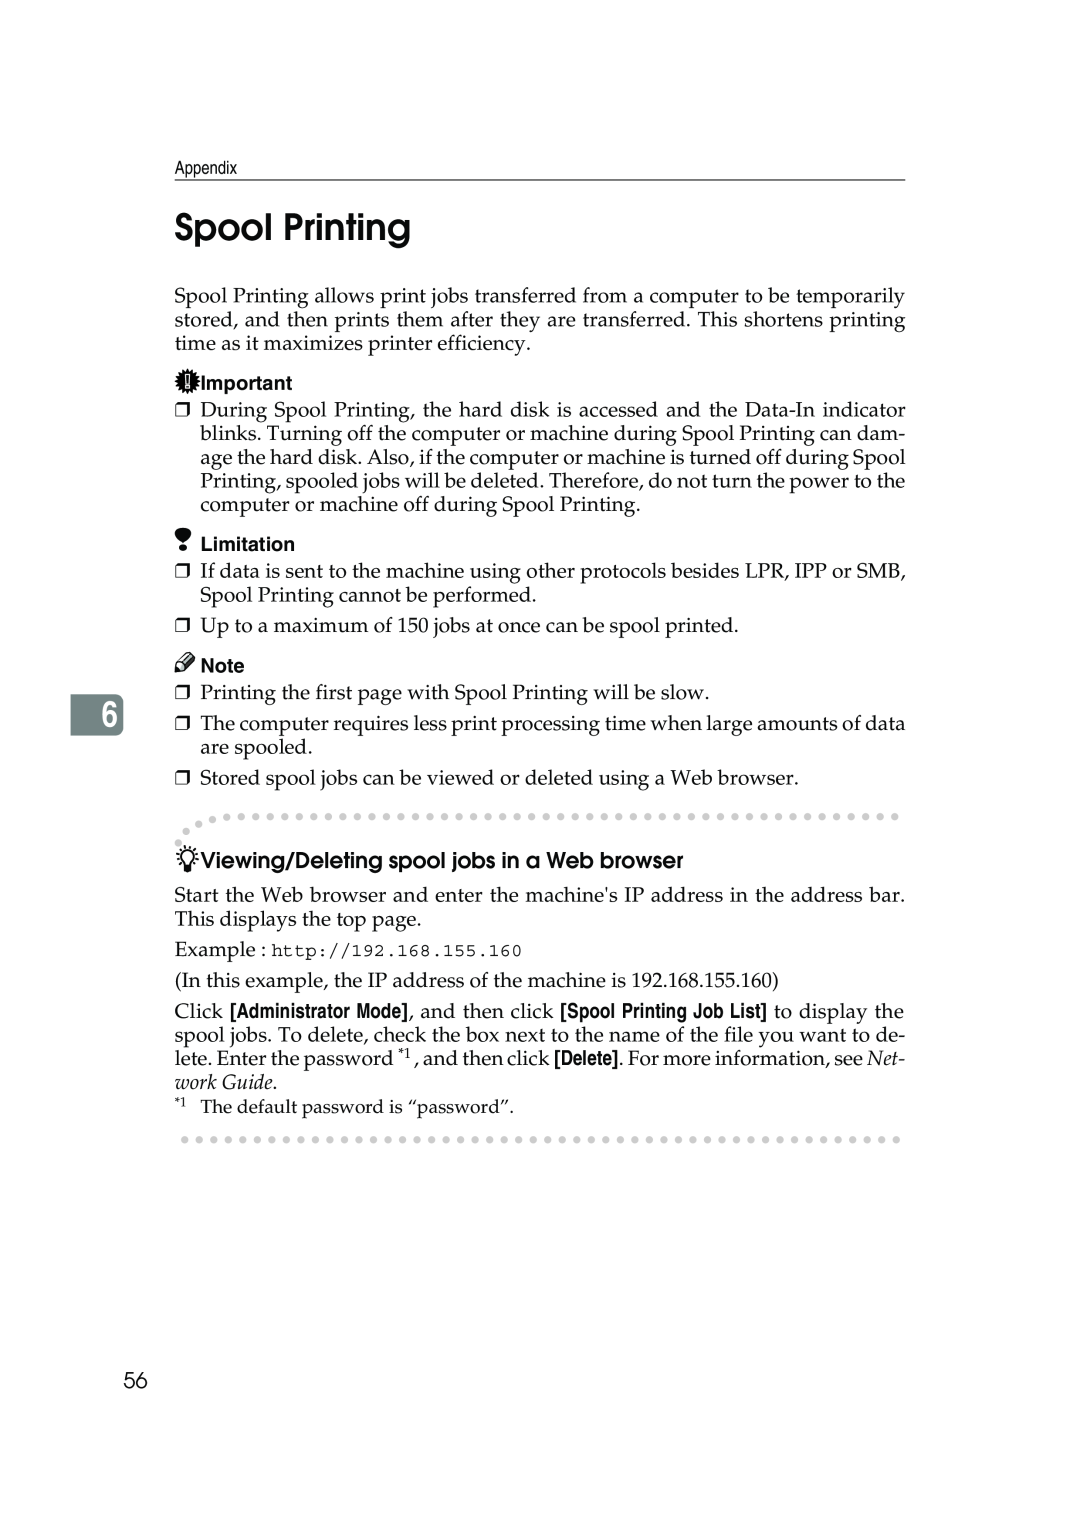 Xerox 2045e appendix Spool Printing, Viewing/Deleting spool jobs in a Web browser, Limitation 